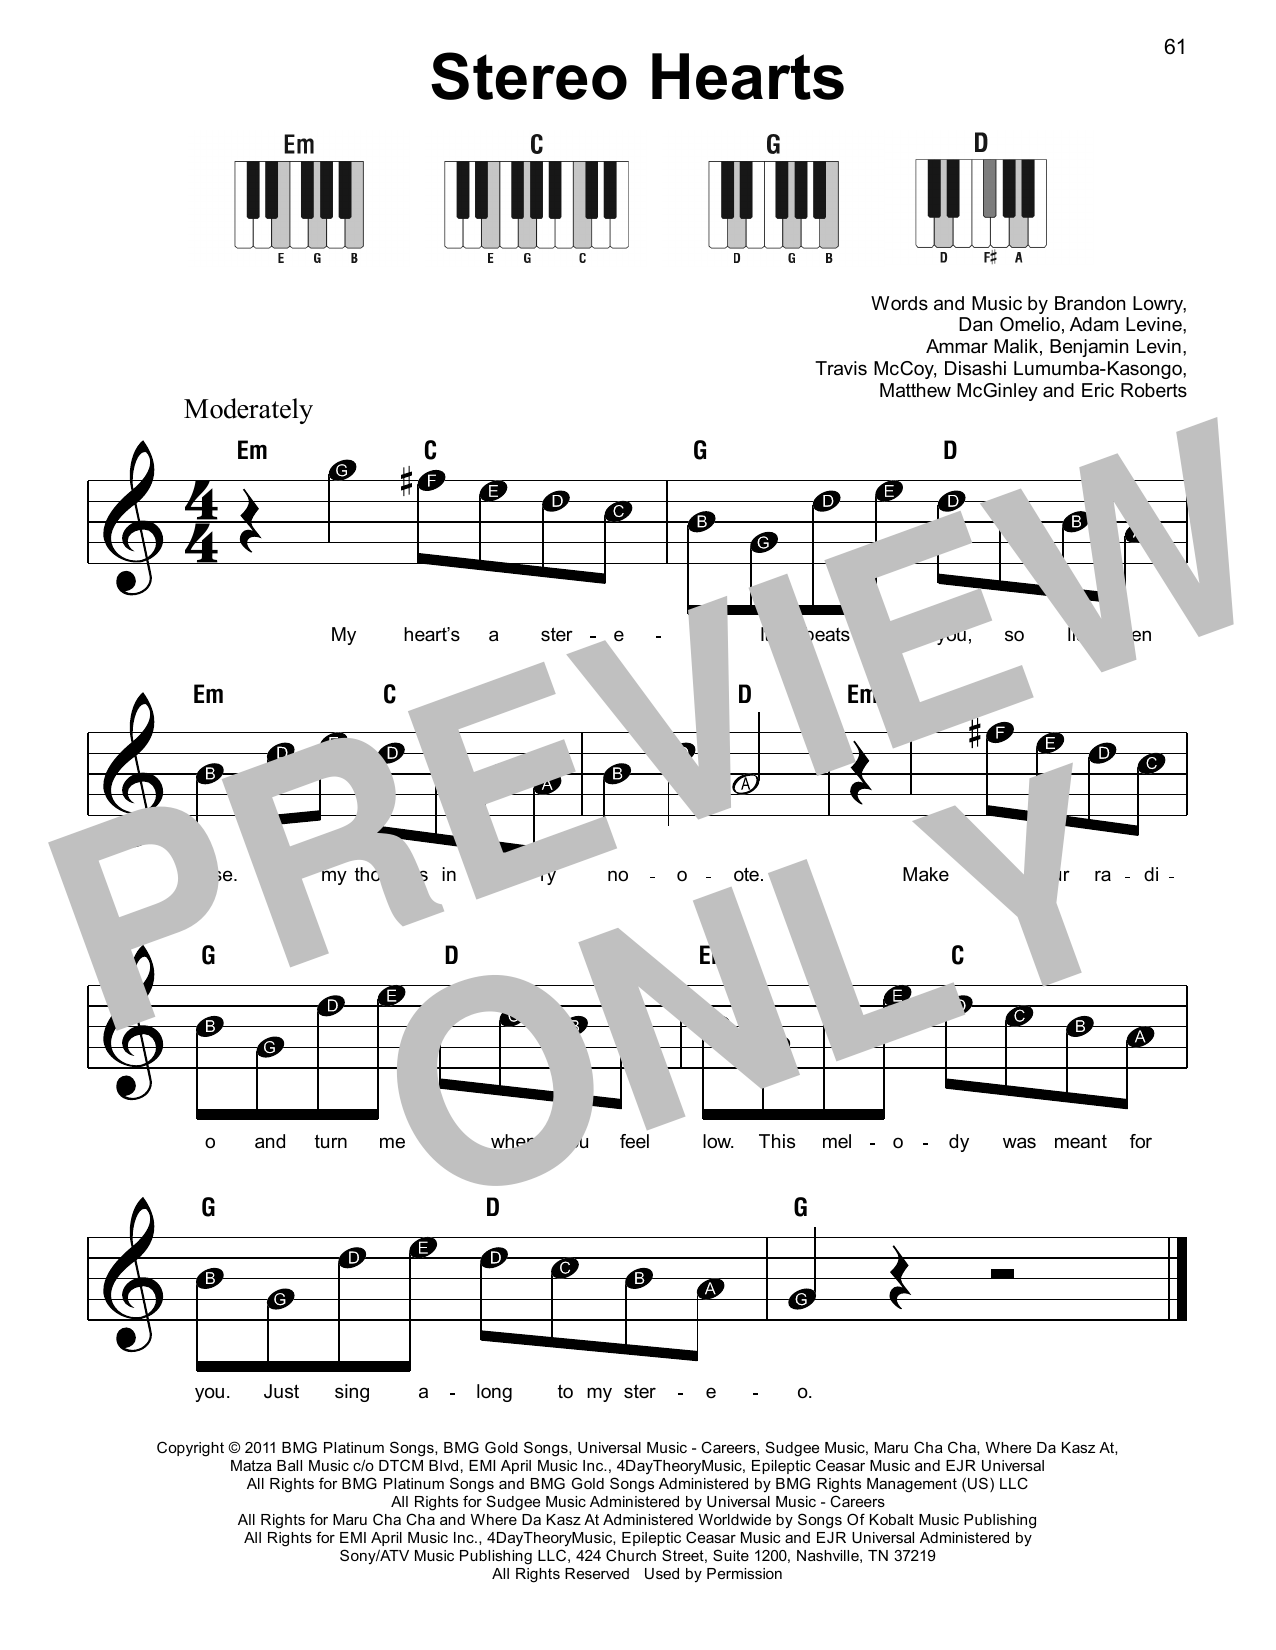 Download Gym Class Heroes Stereo Hearts (feat. Adam Levine) Sheet Music